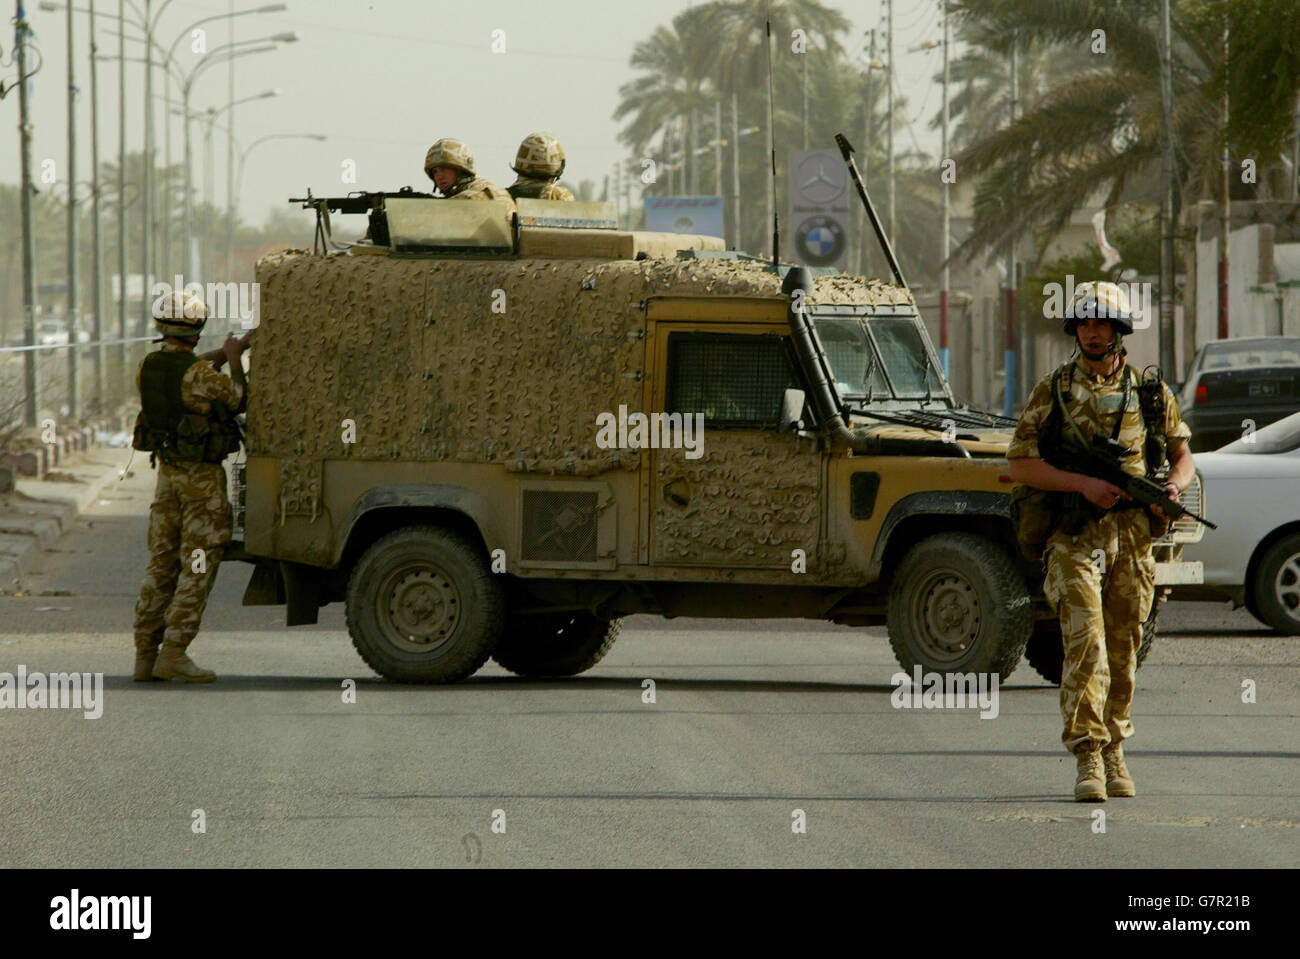 Royal Engineer High Risk Search Team in action in Iraq - Basra Stock Photo